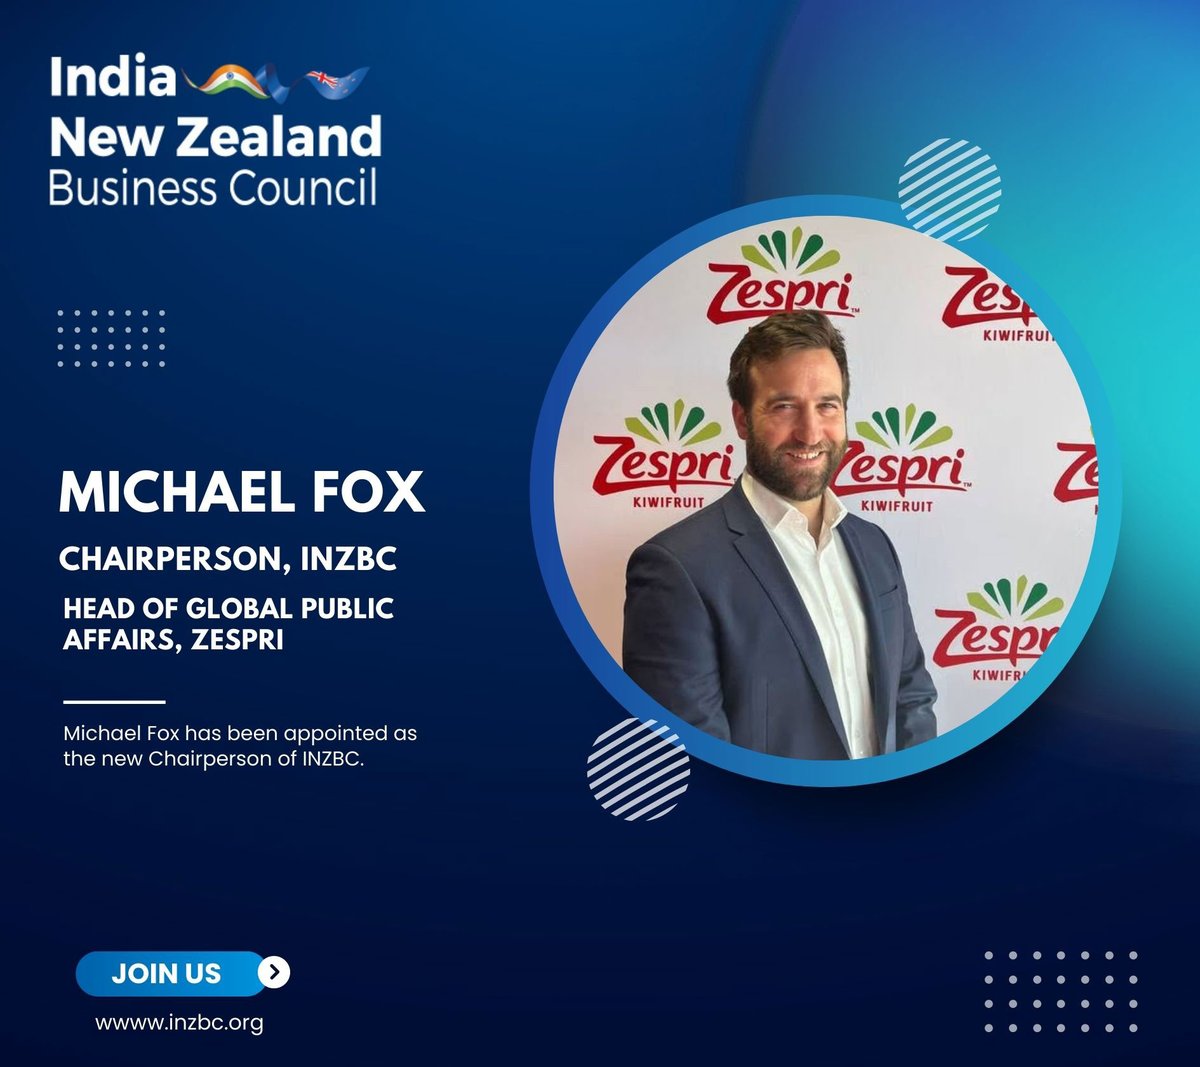 Announcement: Board member Michael Fox has been appointed as the Chair of the India New Zealand Business Council at the AGM on June 30 2023, replacing Earl Rattray who has completed his two-year term as Chair. See full announcement here: inzbc.org/post/michael-f…